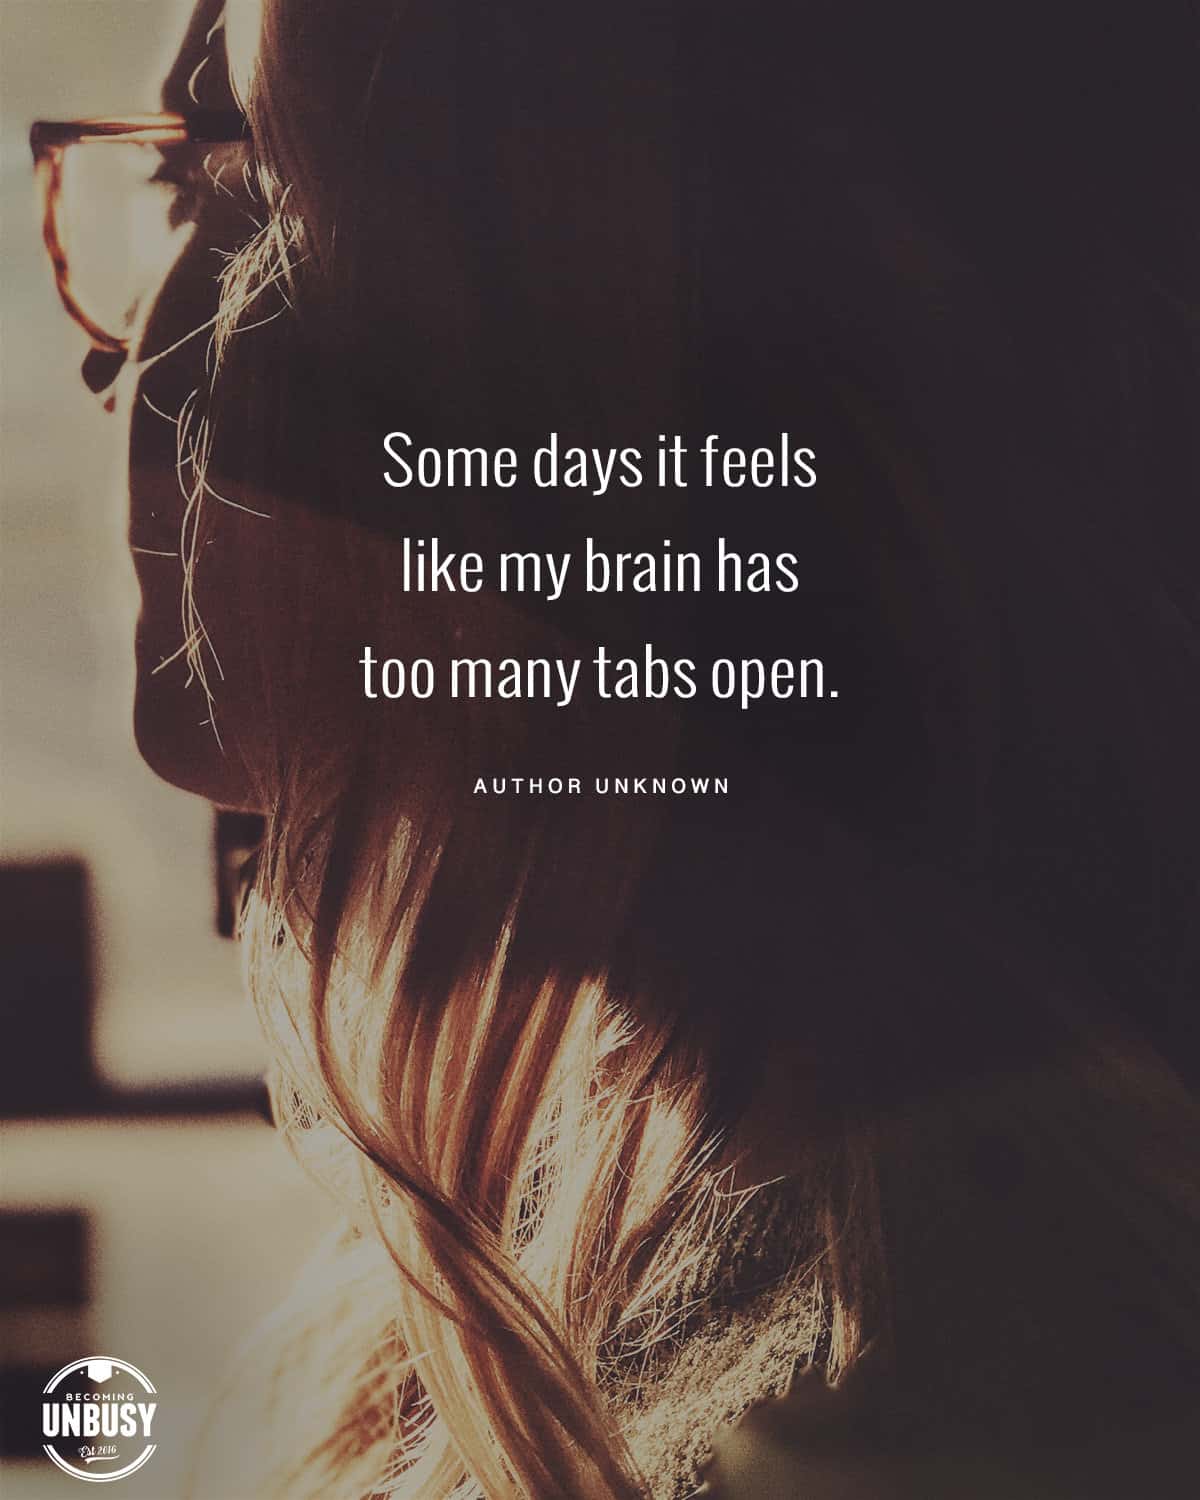 An image of an overwhelmed woman with the following quote written over top, "Some days it feels like my brain has too many tabs open."